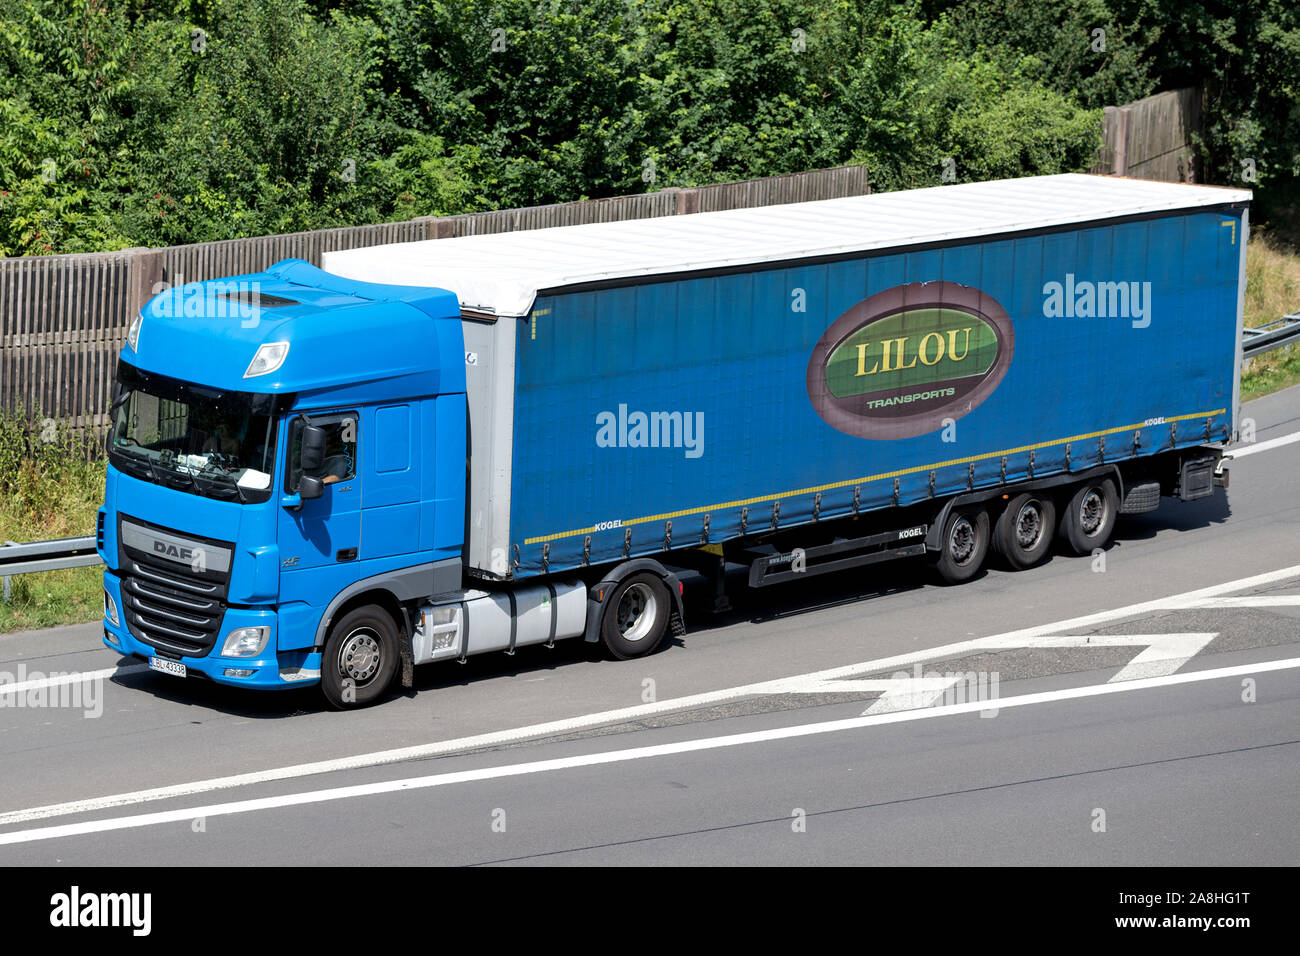 DAF XF truck with Dachser curtainside trailer on motorway Stock Photo -  Alamy